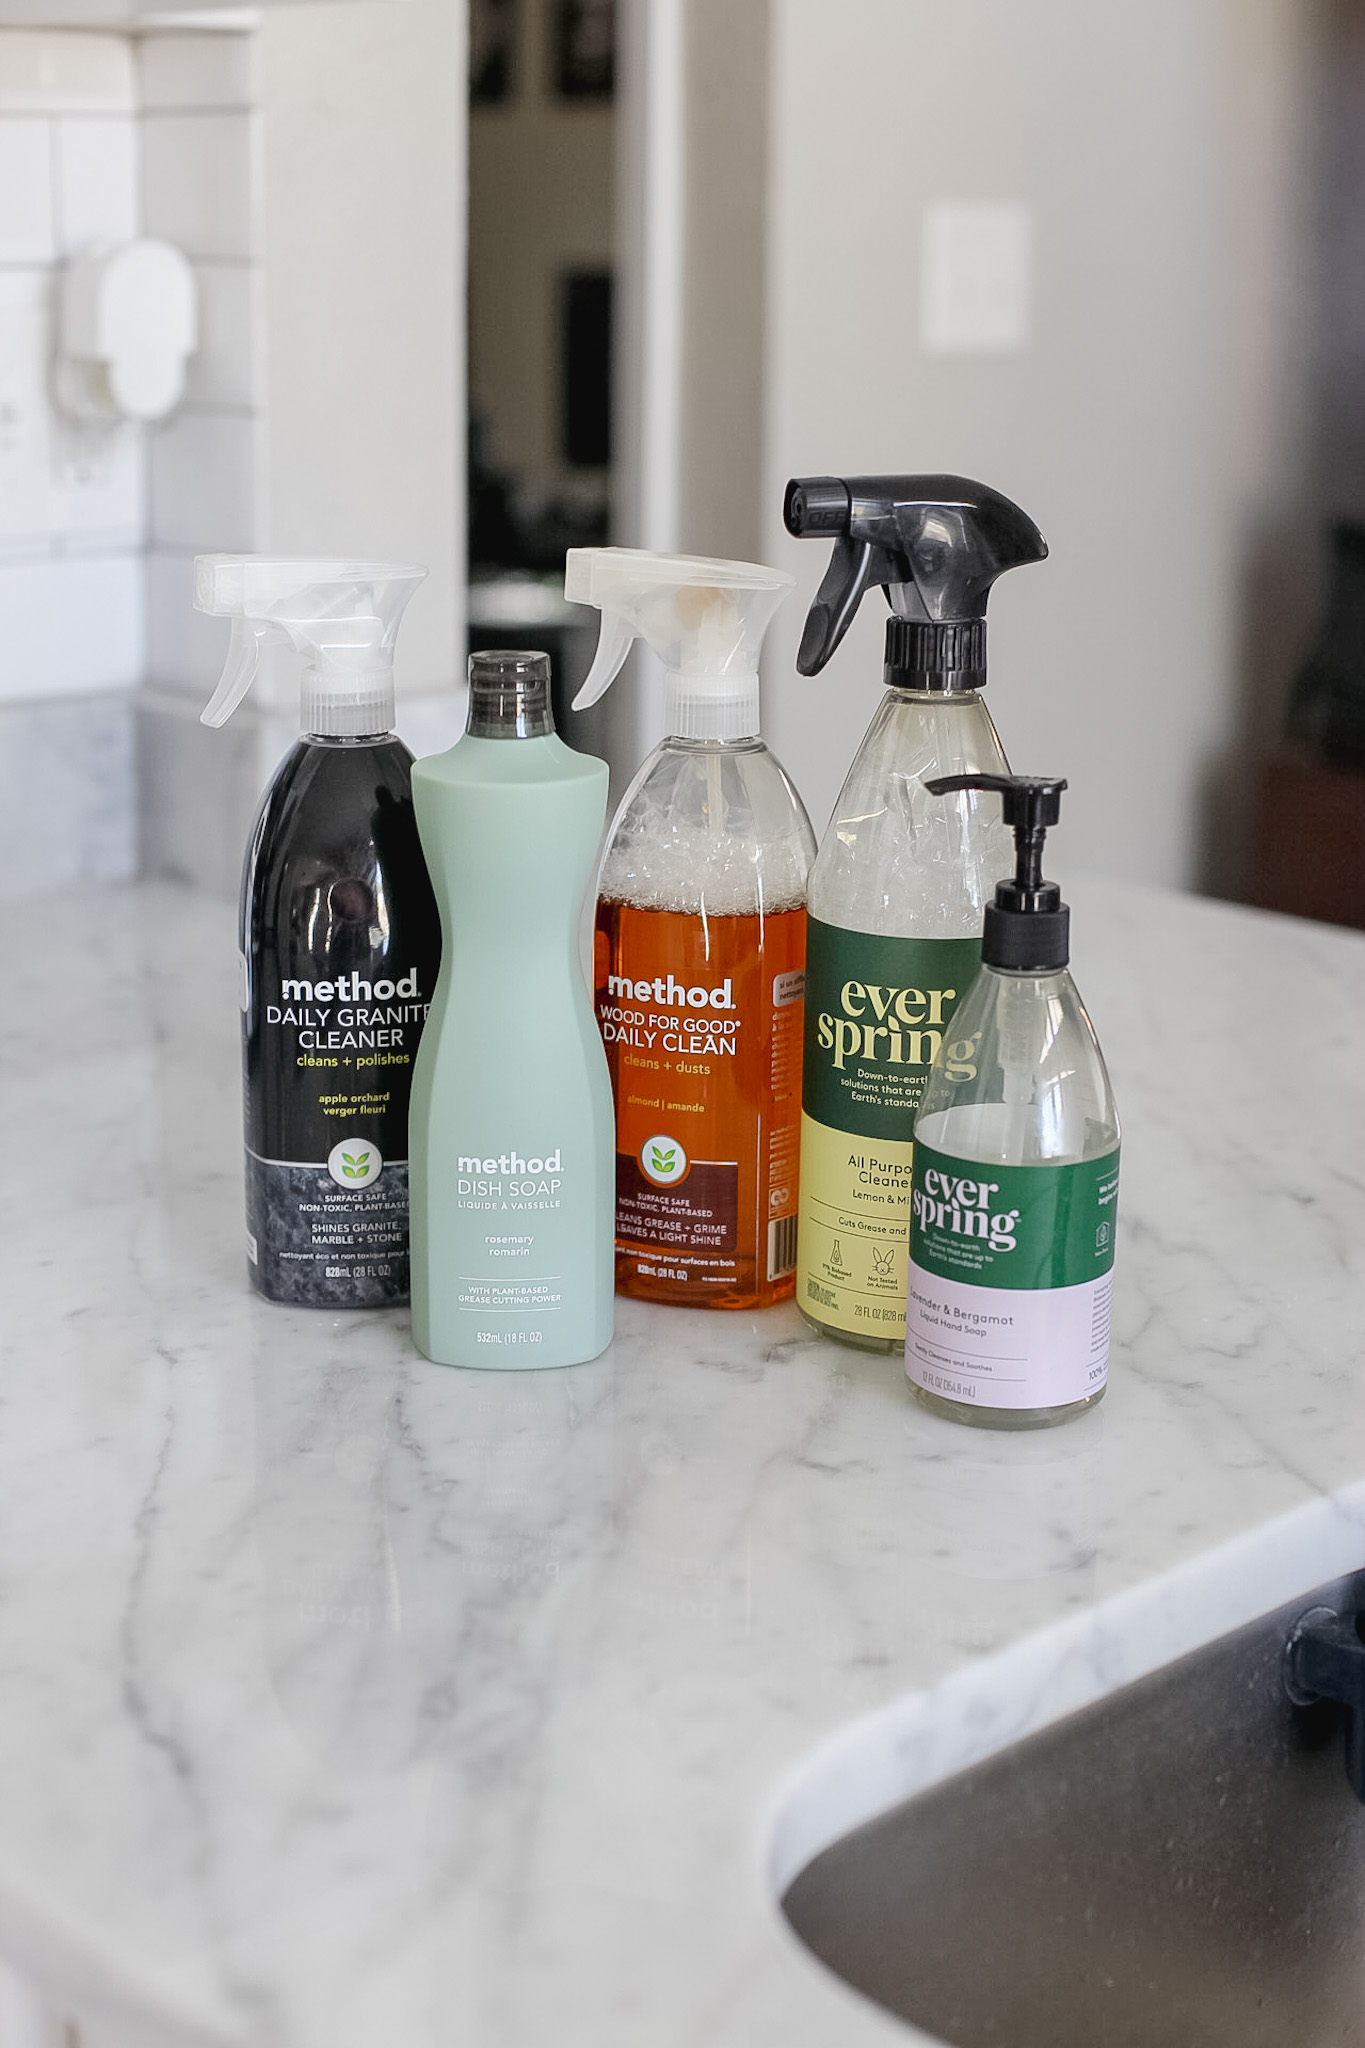 https://affordablebyamanda.com/wp-content/uploads/2020/03/natural-non-toxic-cleaning-products.jpg